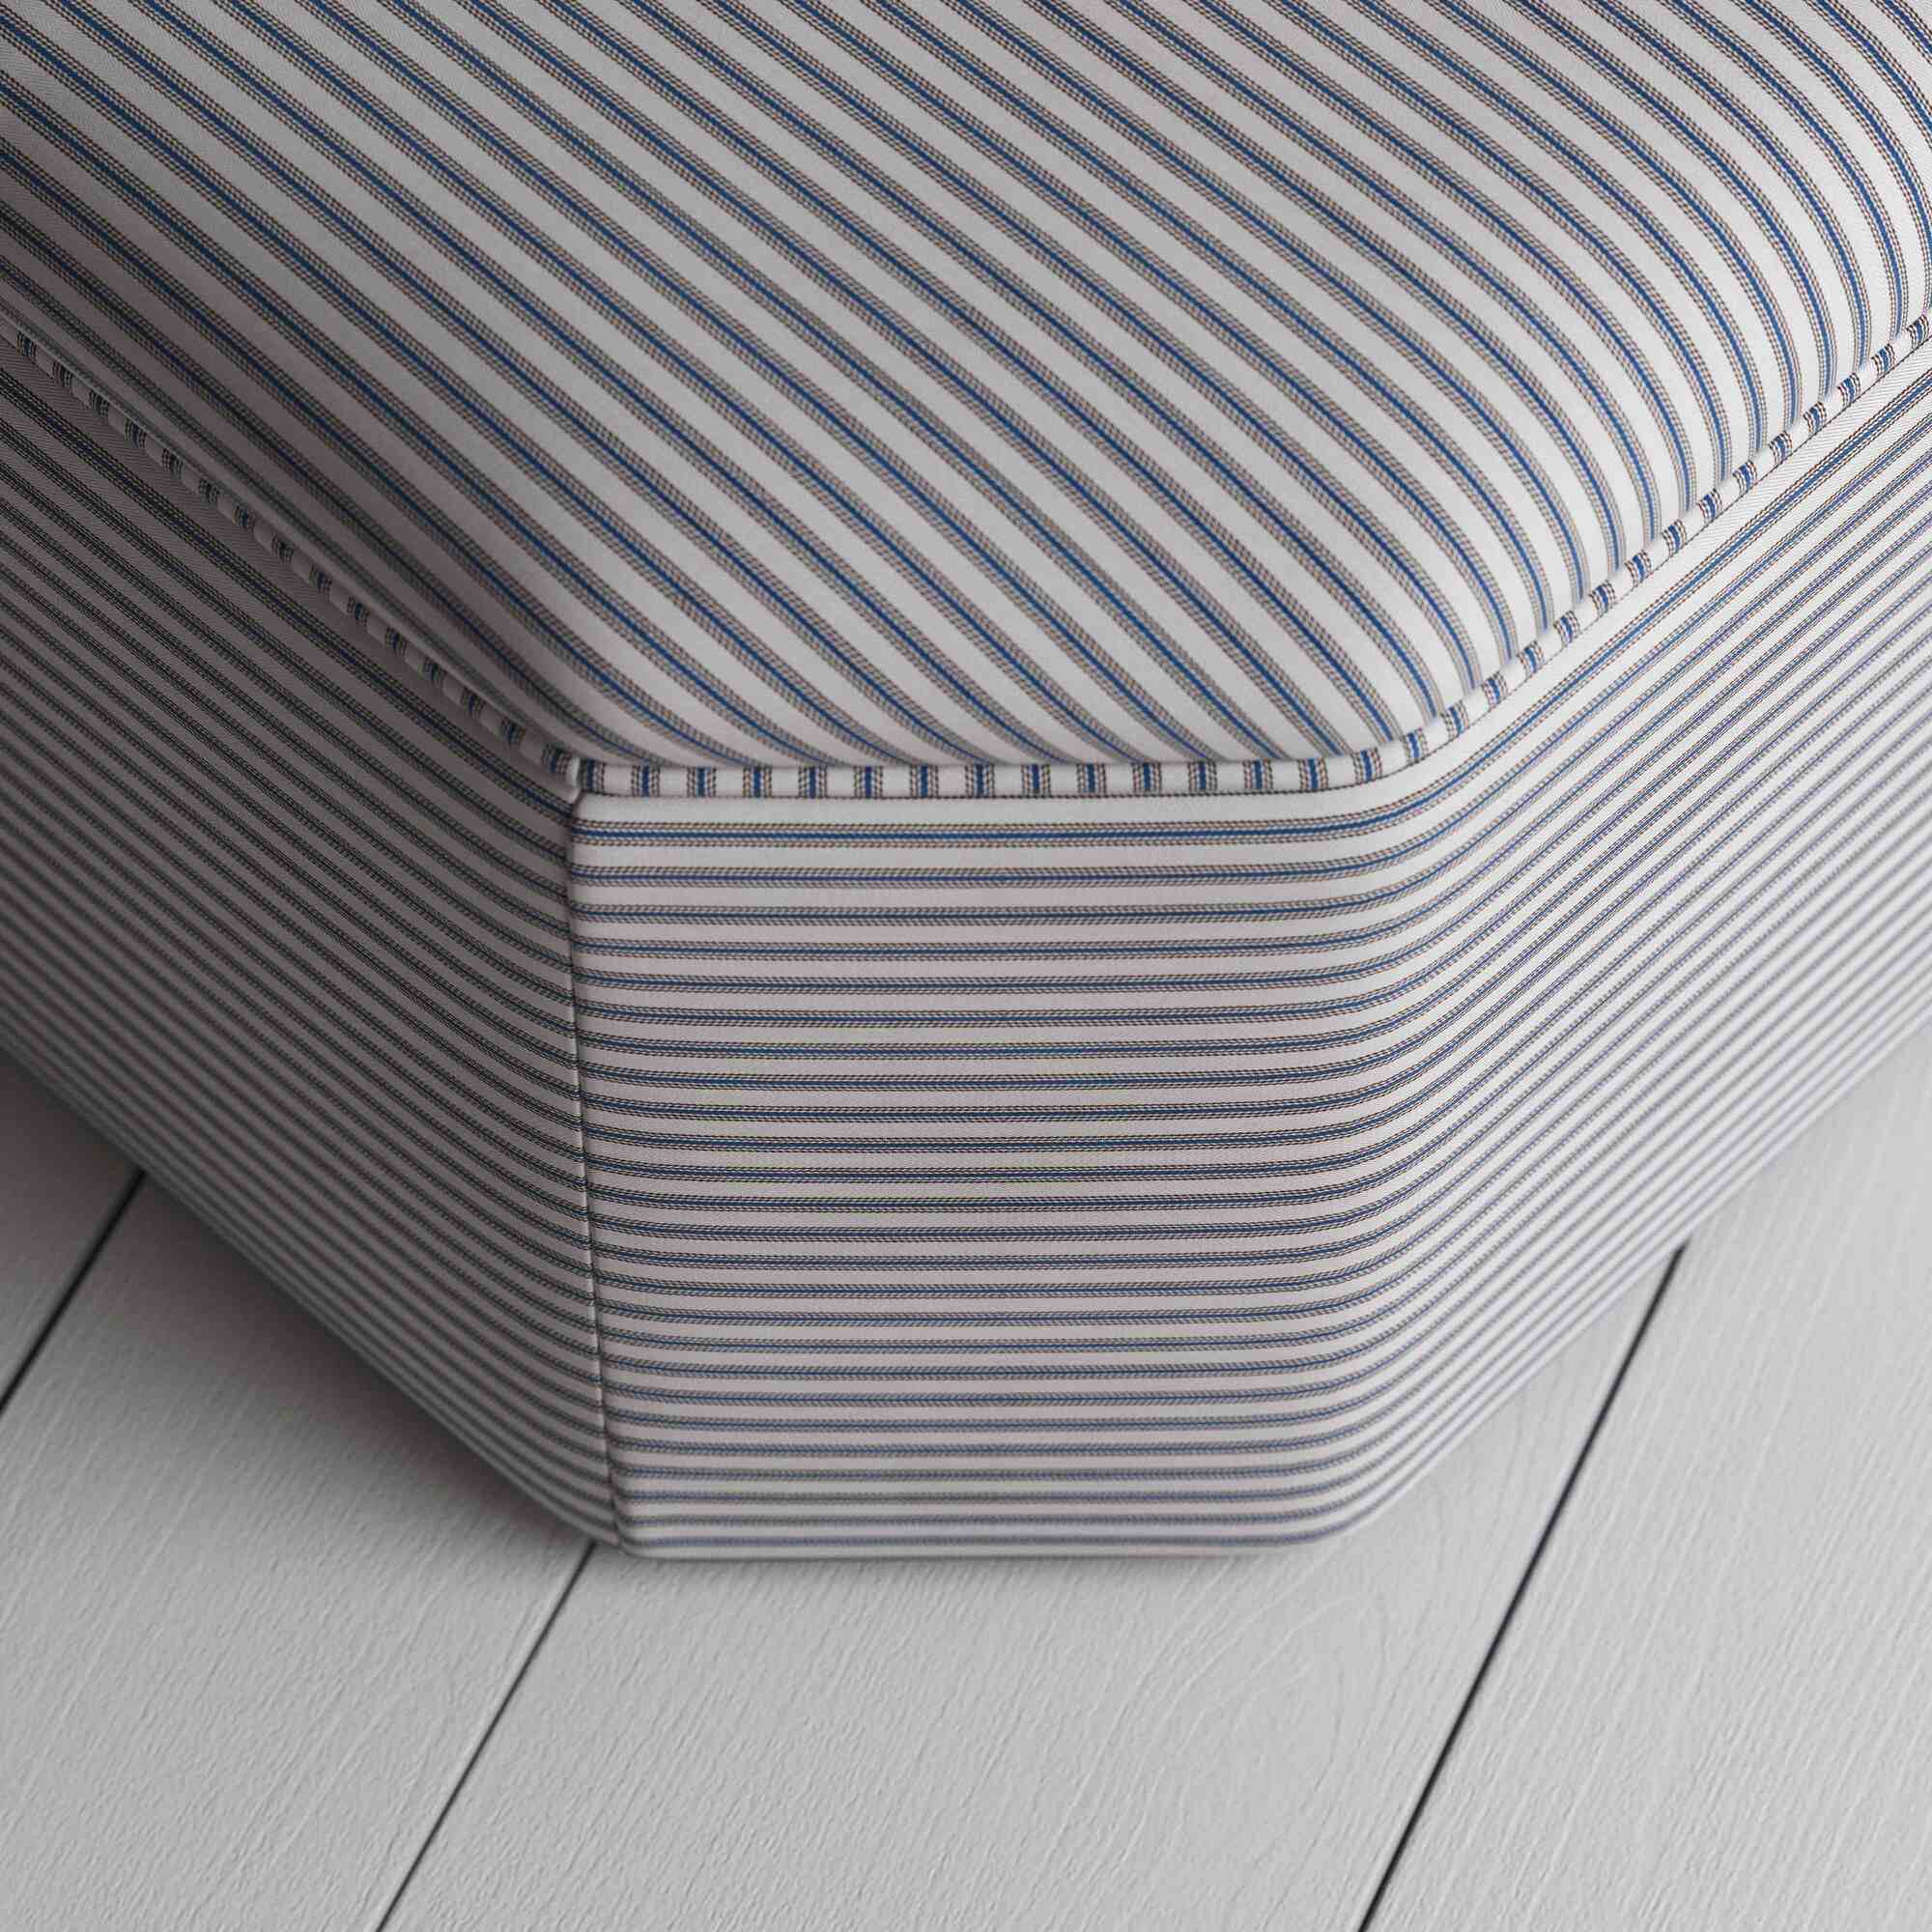  Hither Hexagonal Ottoman in Ticking Cotton, Blue Brown 